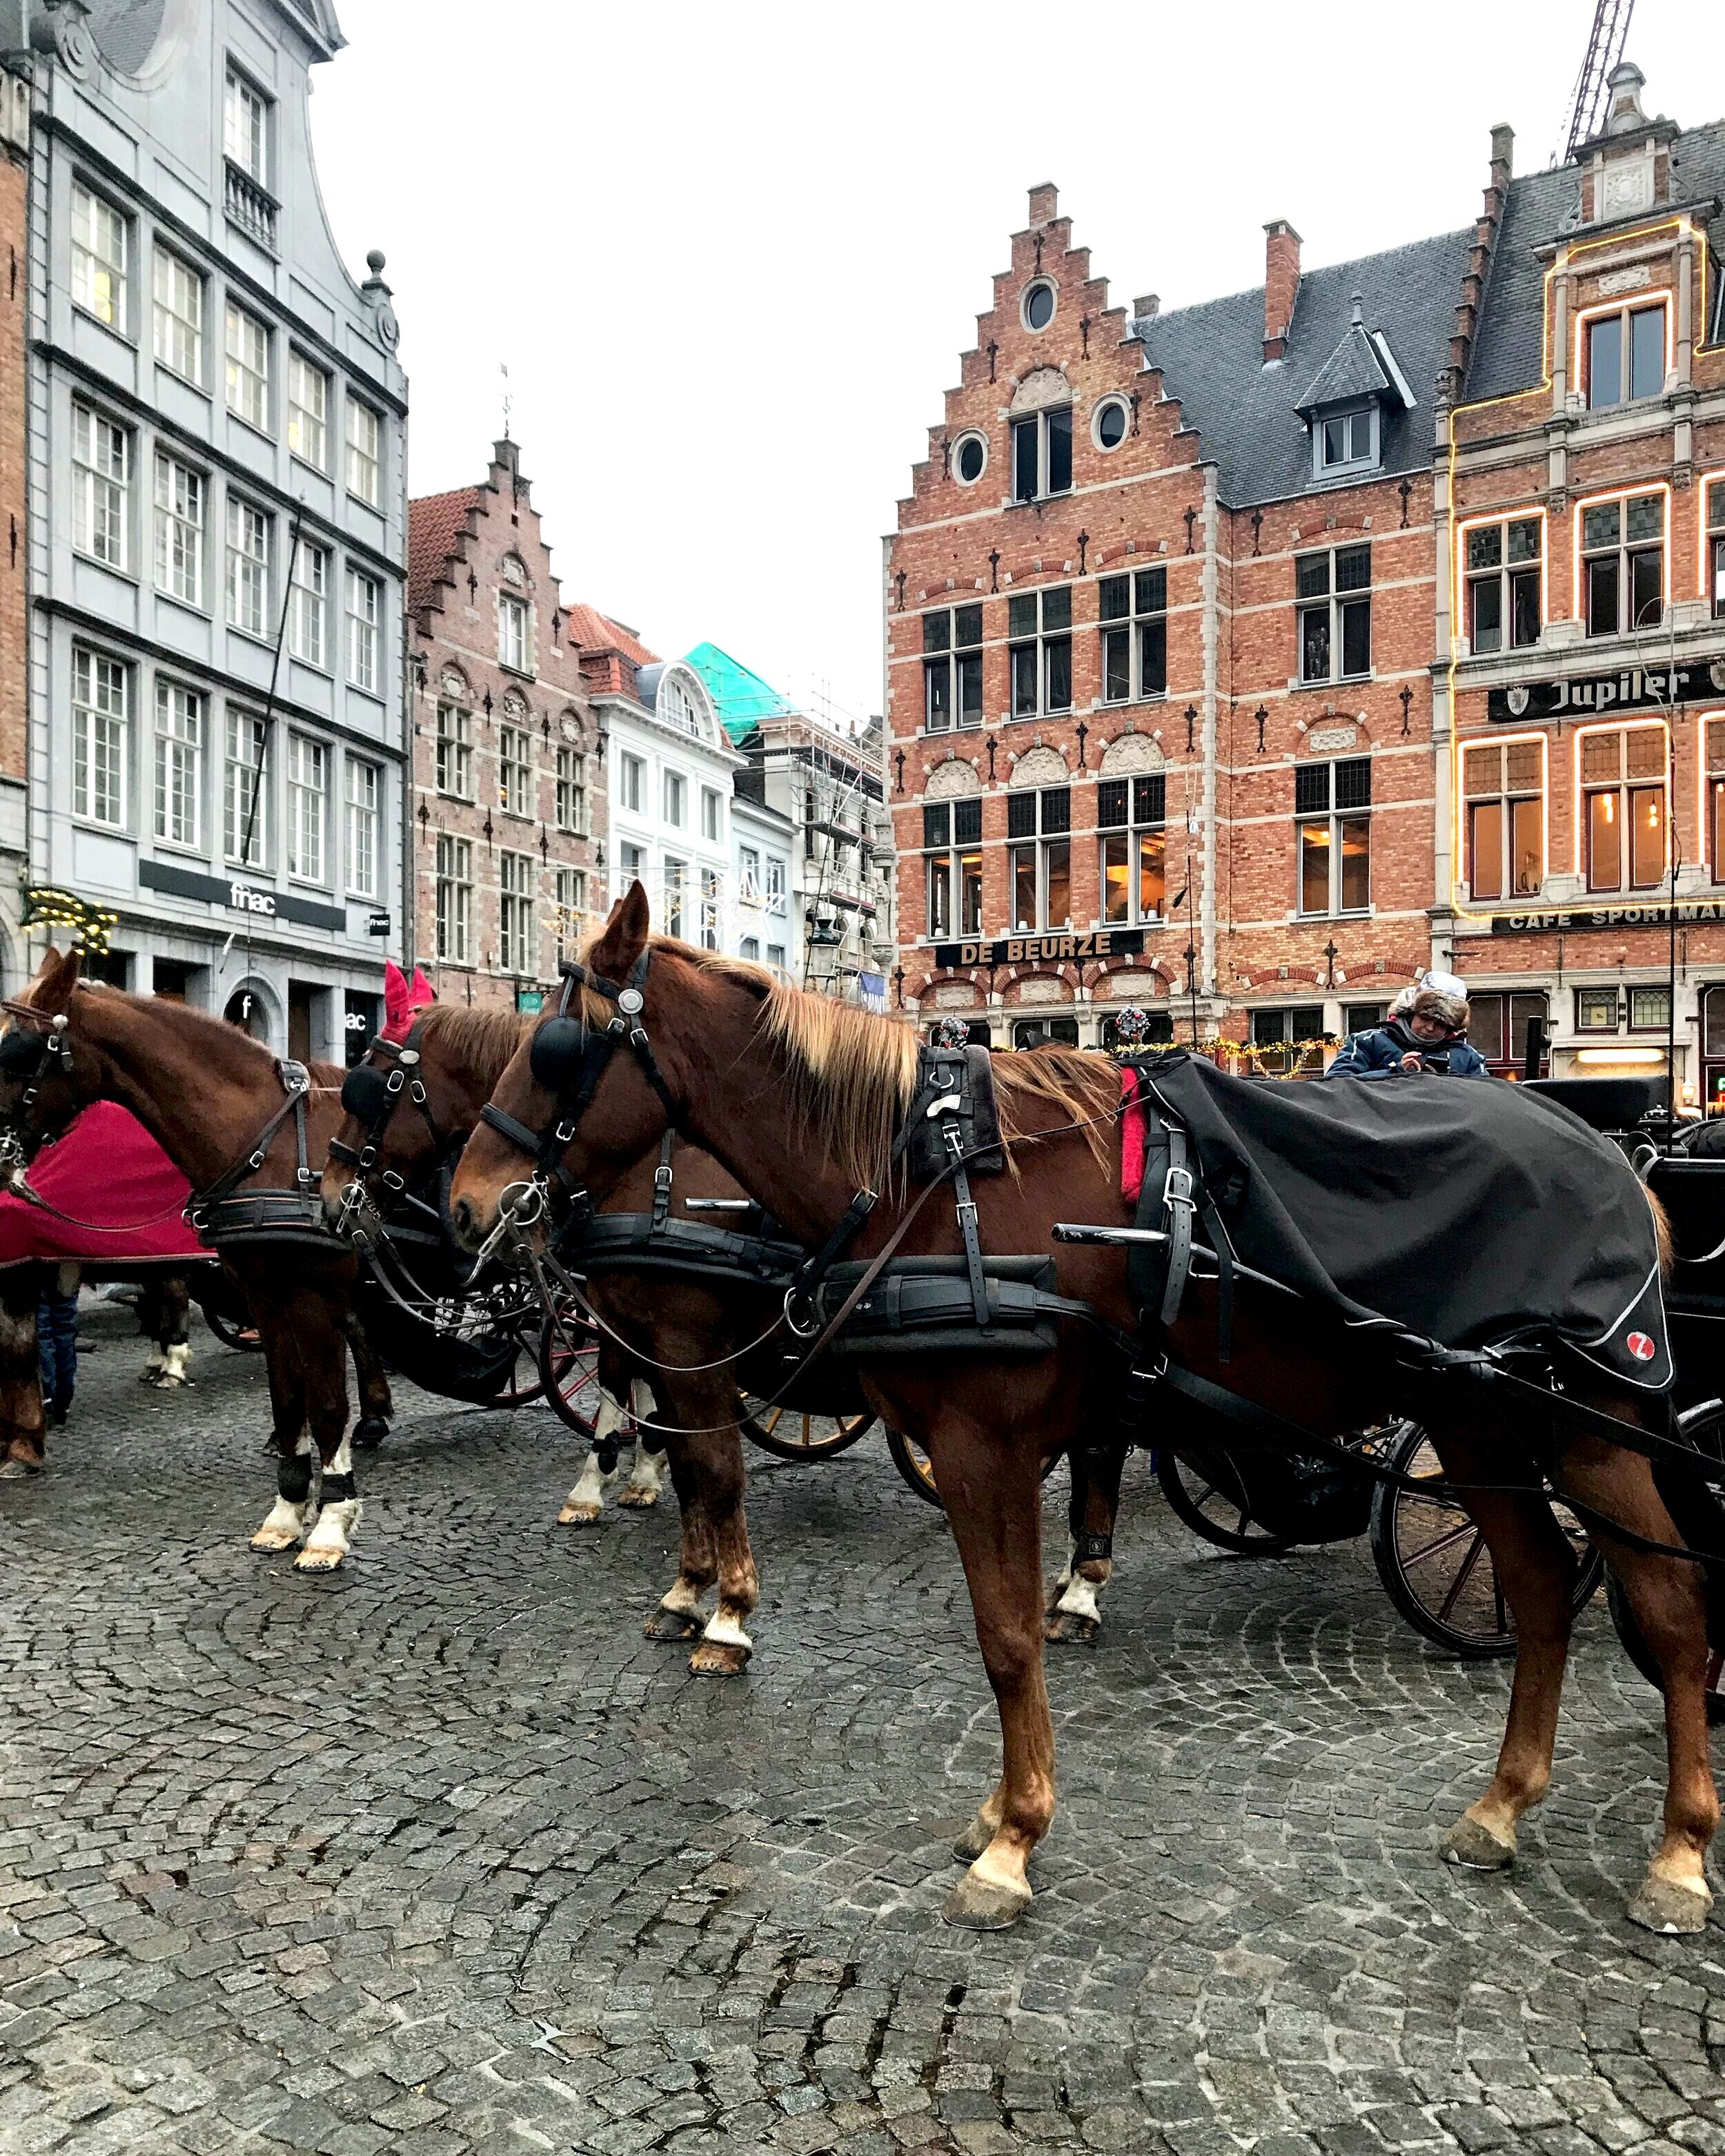 Step back in time with Horse-drawn carriages on the cobblestone streets. Enjoy the charming atmosphere! 